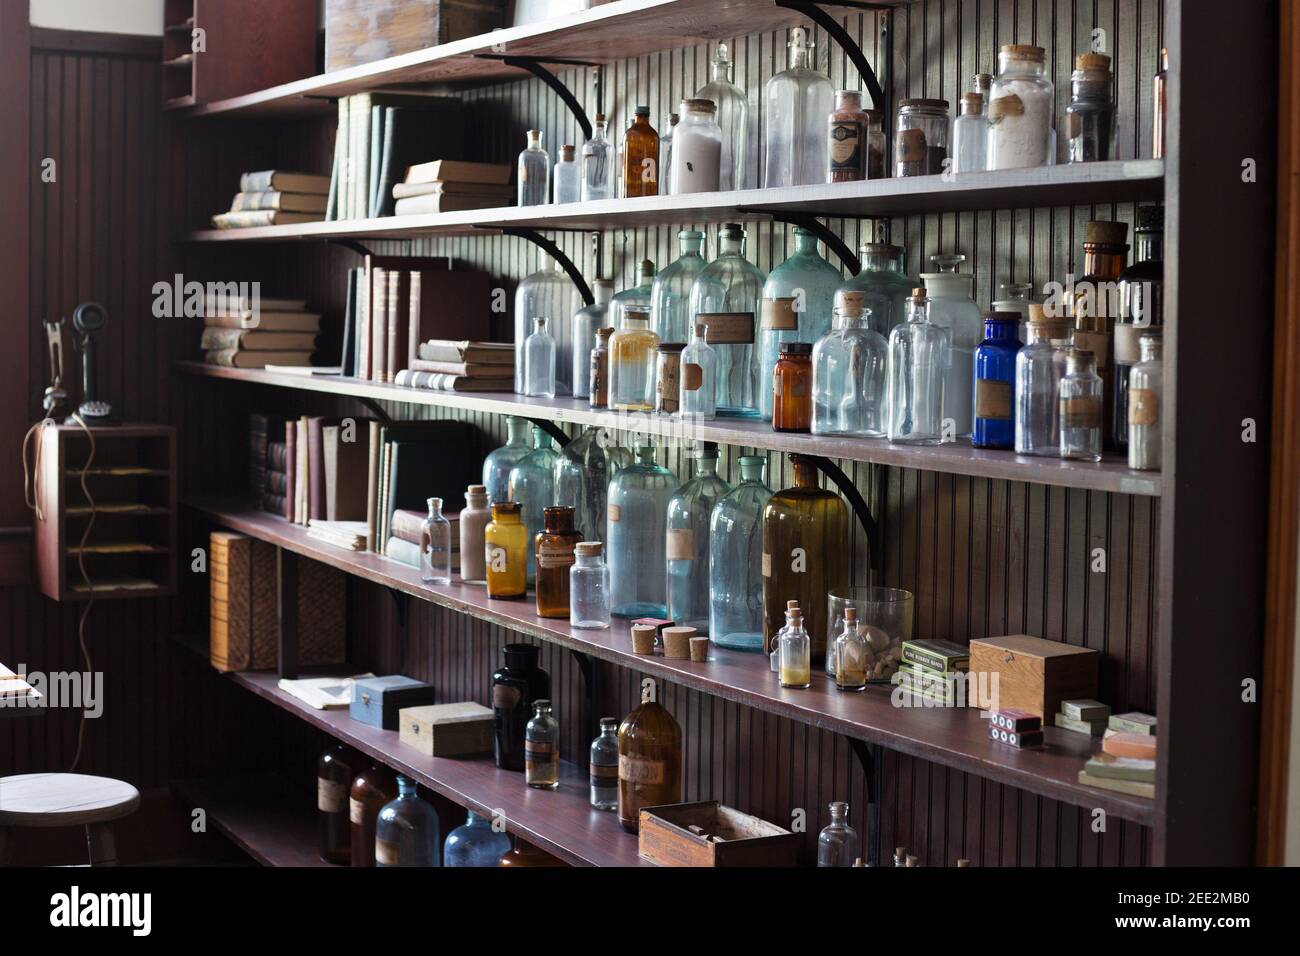 Antique bottles of different colors on a shelf. Stock Photo